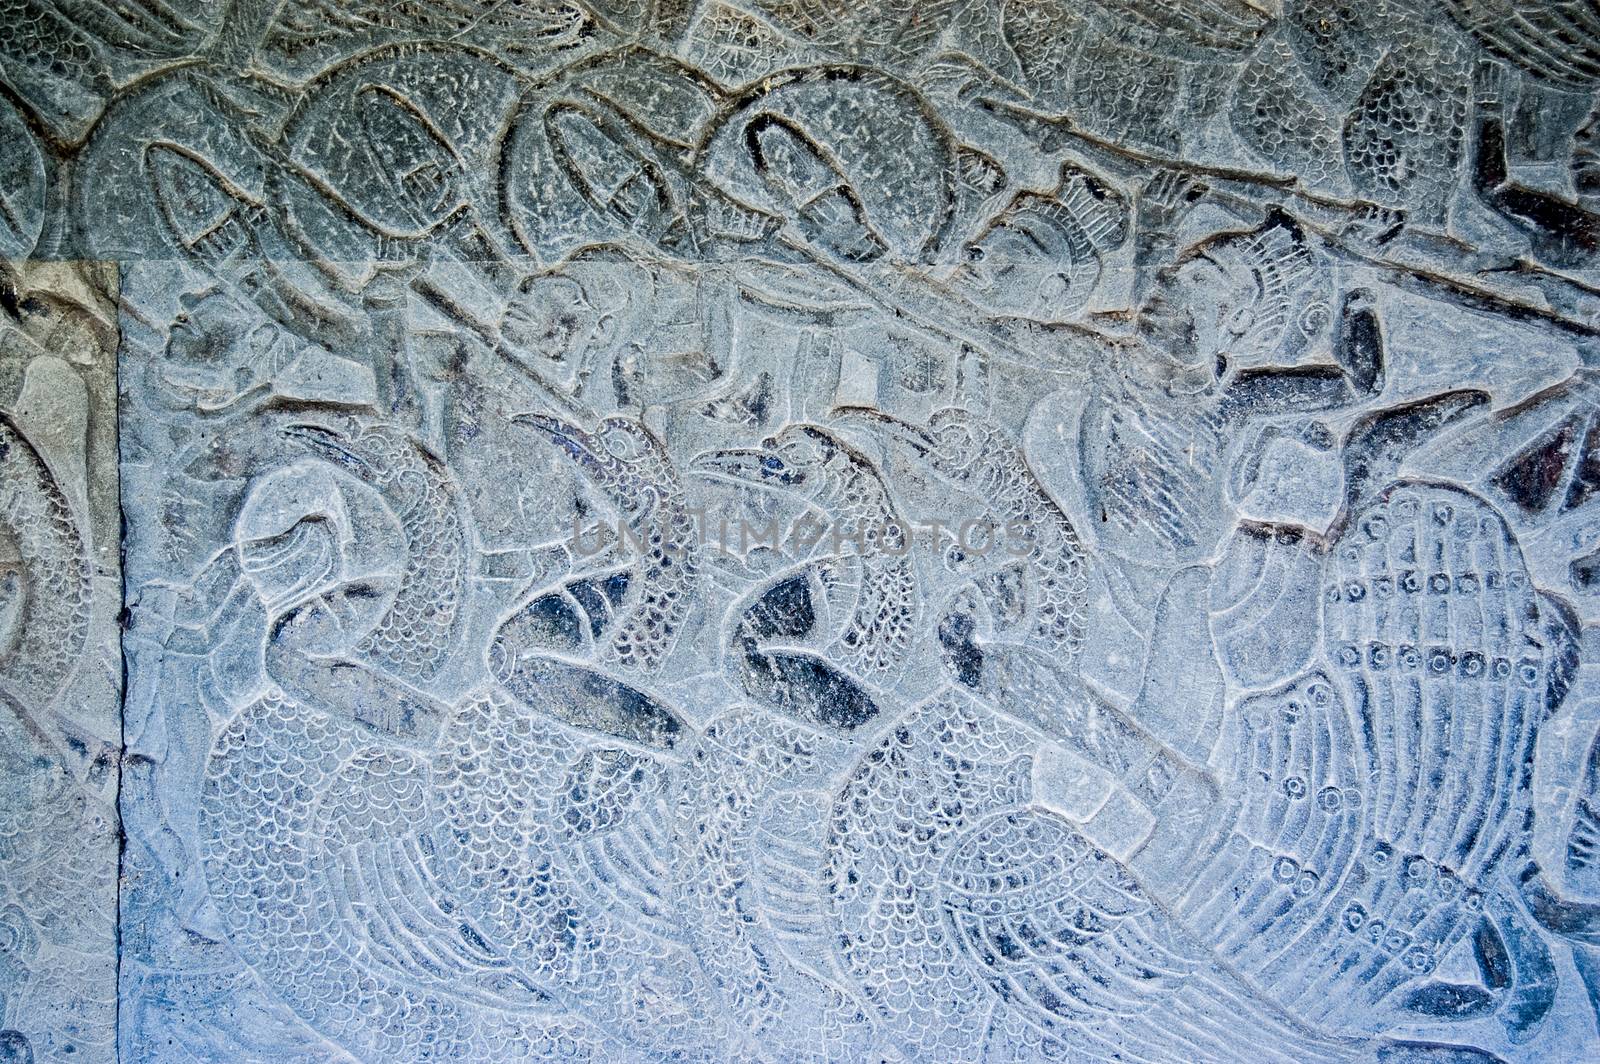 Bas relief carving showing soldiers riding into battle on the backs of peacock birds.  Exterior wall of the historic Angkor Wat temple in Siem Reap, Cambodia.